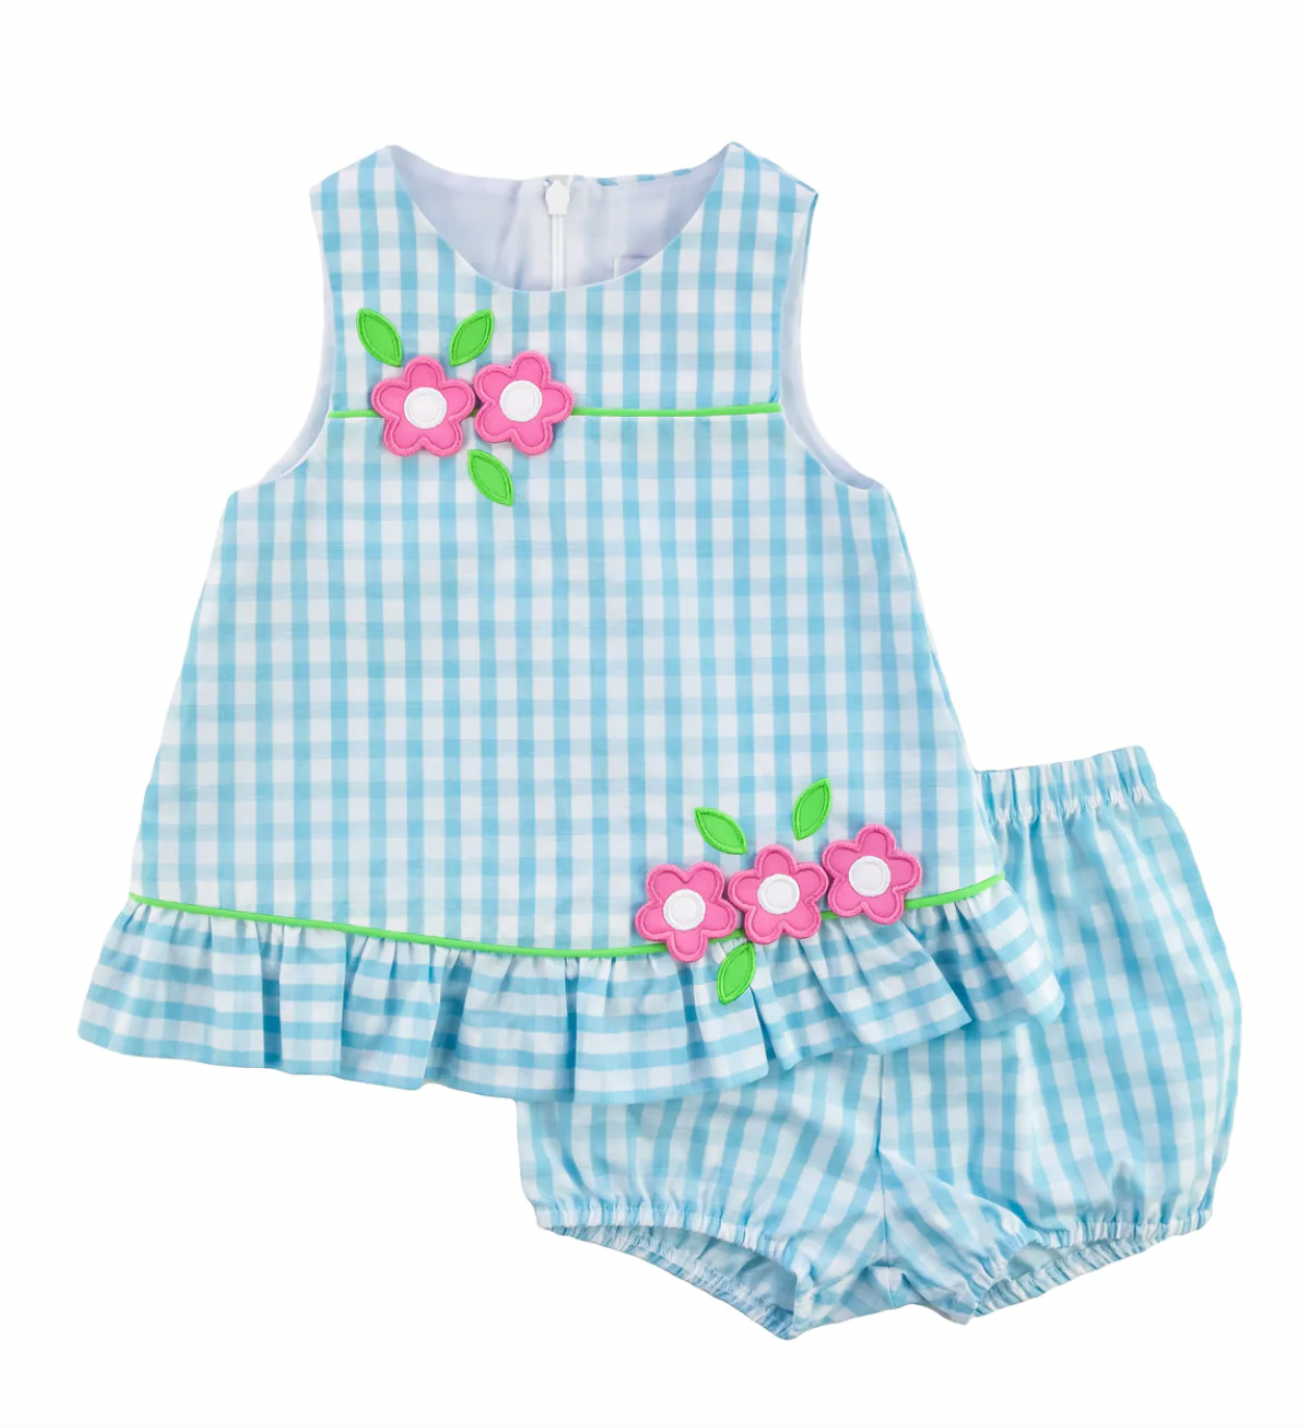 Check Dress And Bloomer With Flowers 6M-24M